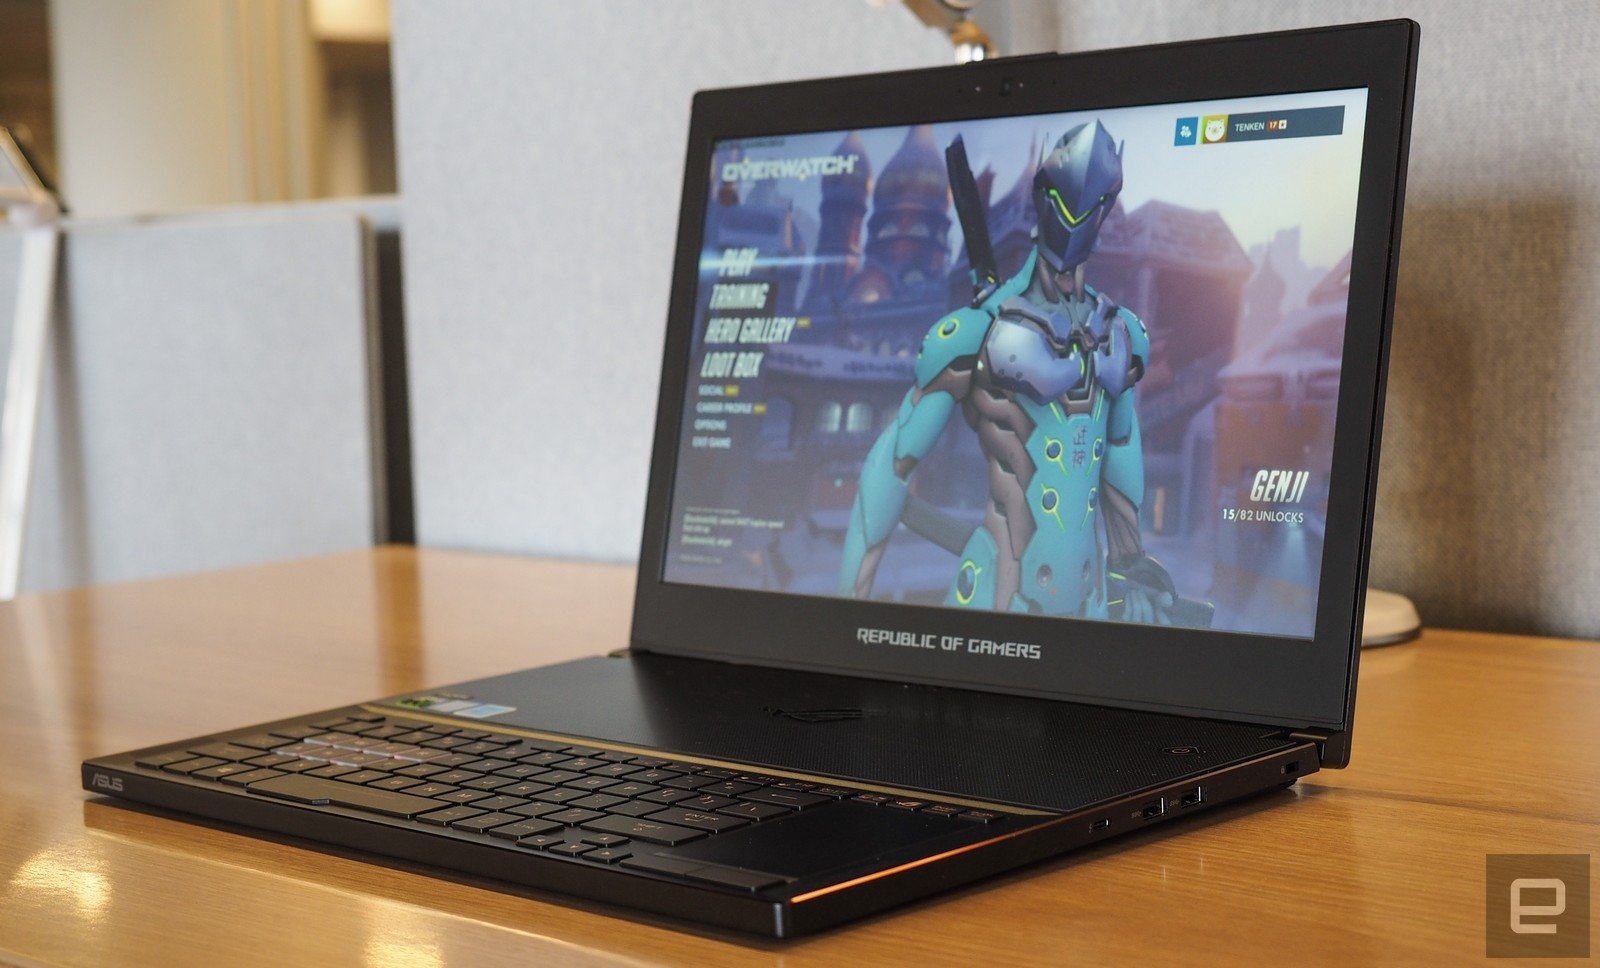 ASUS ROG Zephyrus review: Gaming laptops will never be the same again | DeviceDaily.com